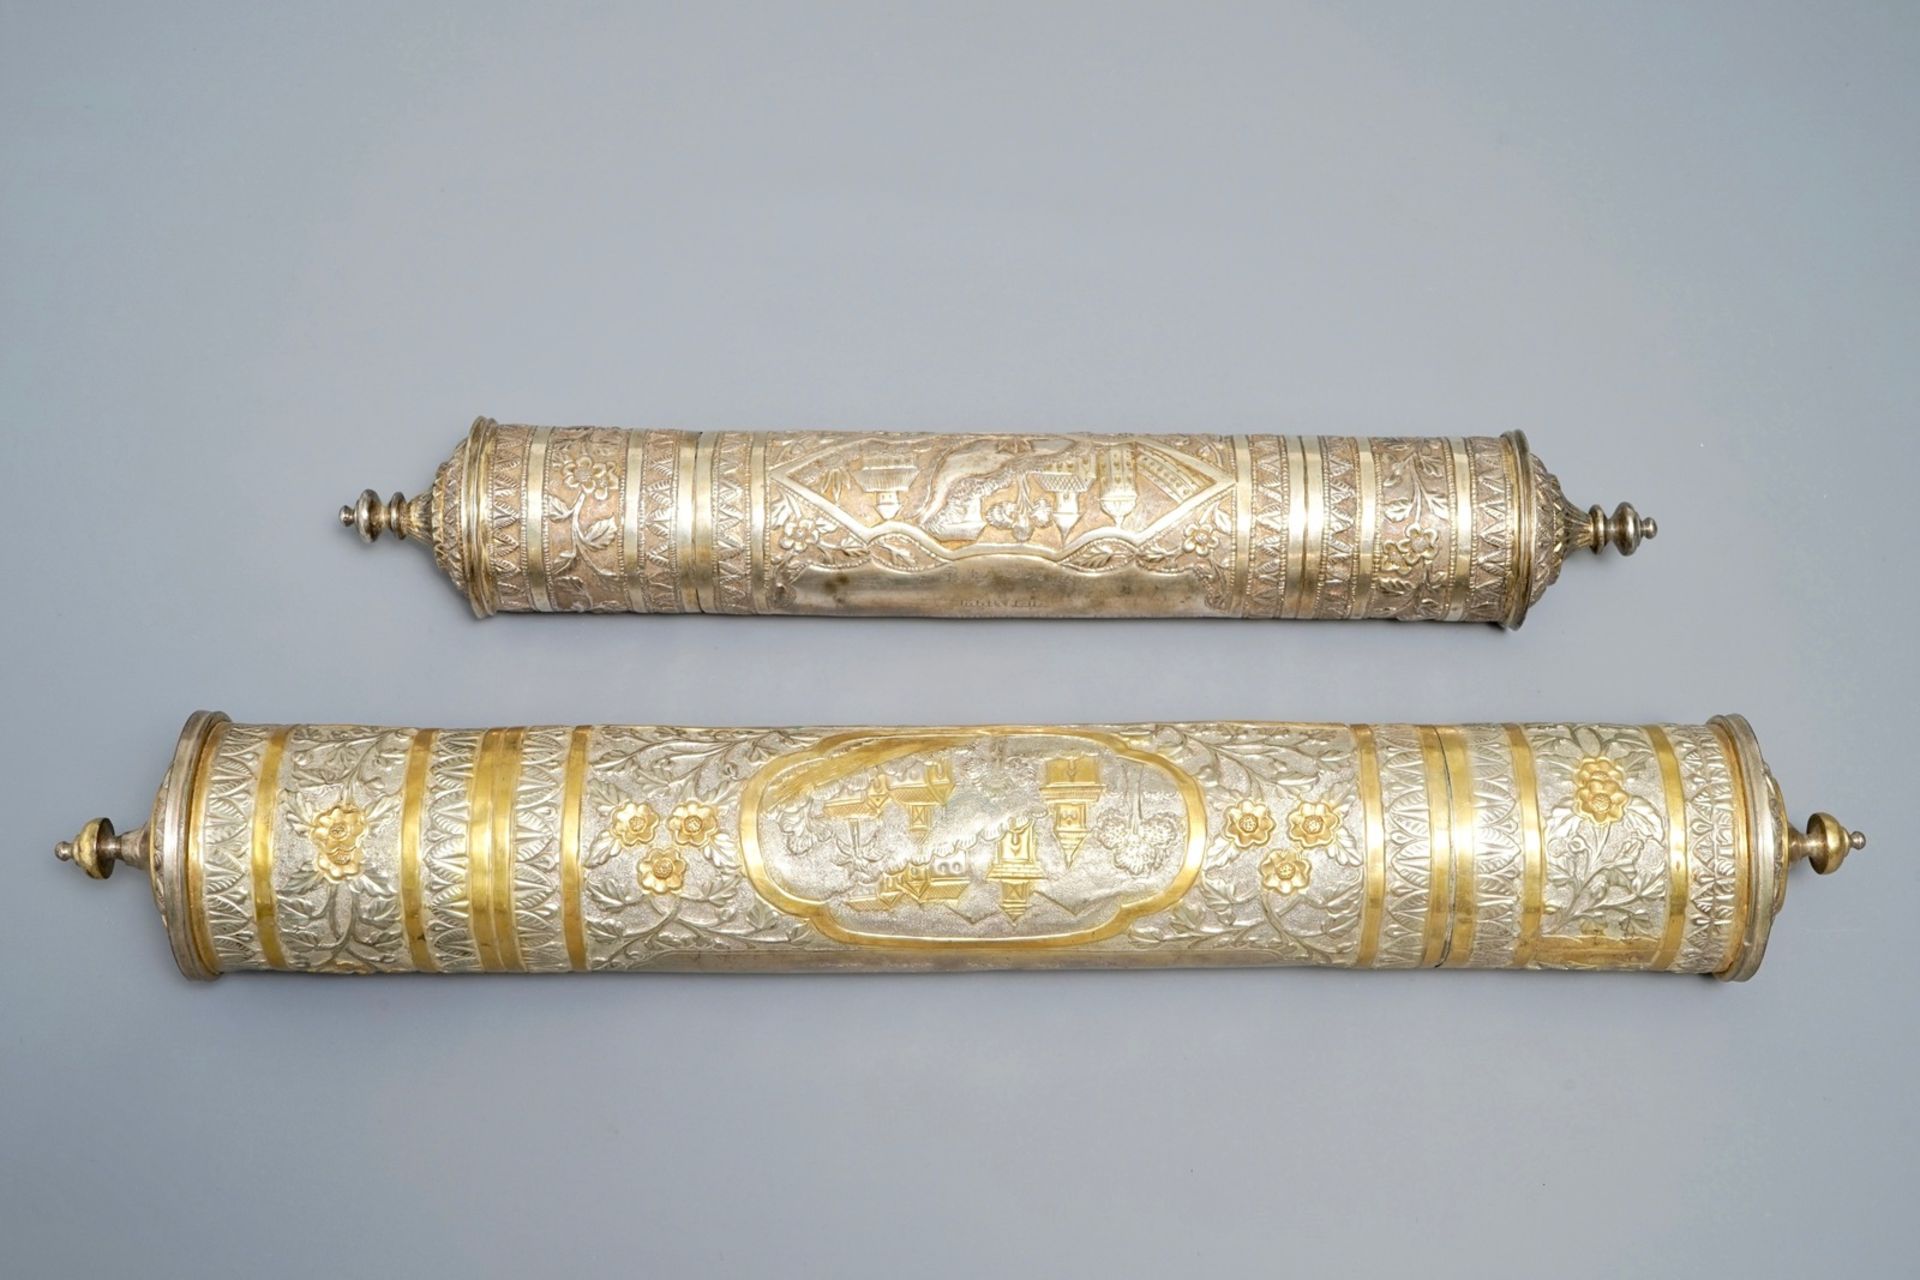 Two tubular parcel-gilt silver incense containers, Tibet or Nepal, 19th C. - Image 3 of 6